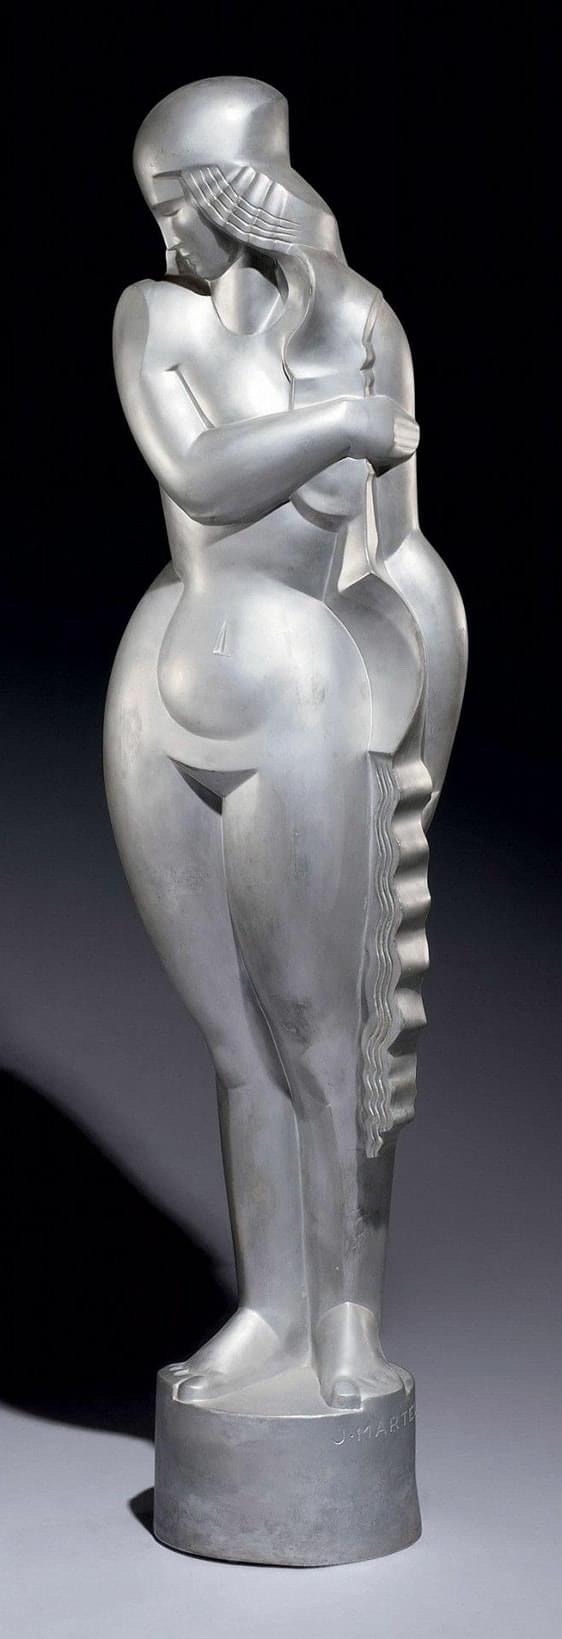 trb752:Nude by Joël and Jan Martel (French Artists-Twins, 1896-1966), c1930, silver